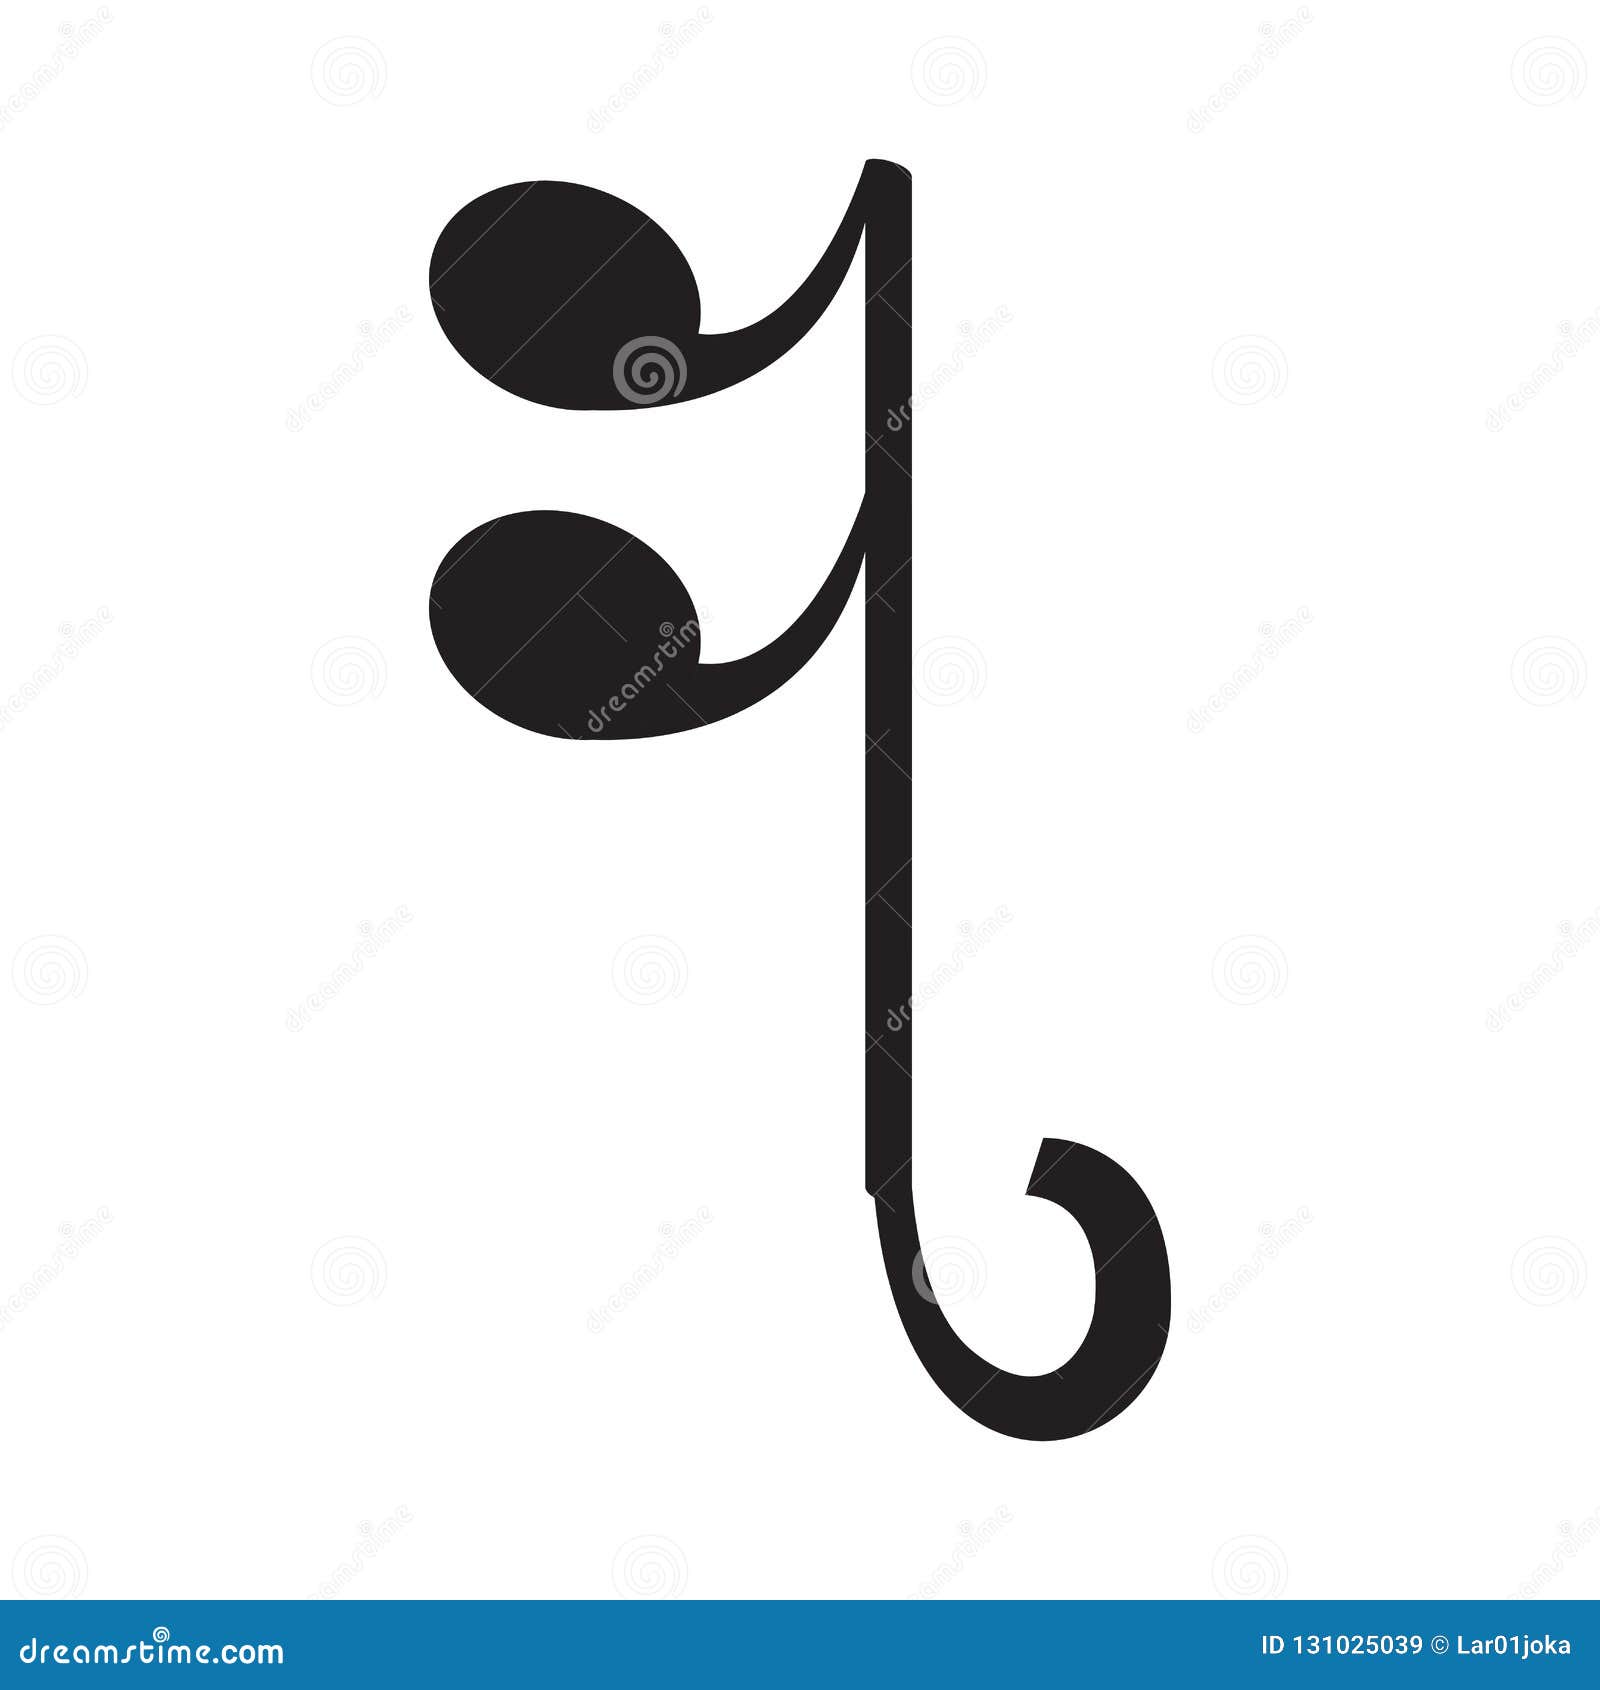 Rests In Music Notes : Quarter Note Musical Note Musical Notation Rest - Notes And Rests Clip Art , Transparent Cartoon ... : The notes are the circular looking marks and most have staffs or lines on them which resemble lower rests are small hash marks or bars in between notes in which no music is played.